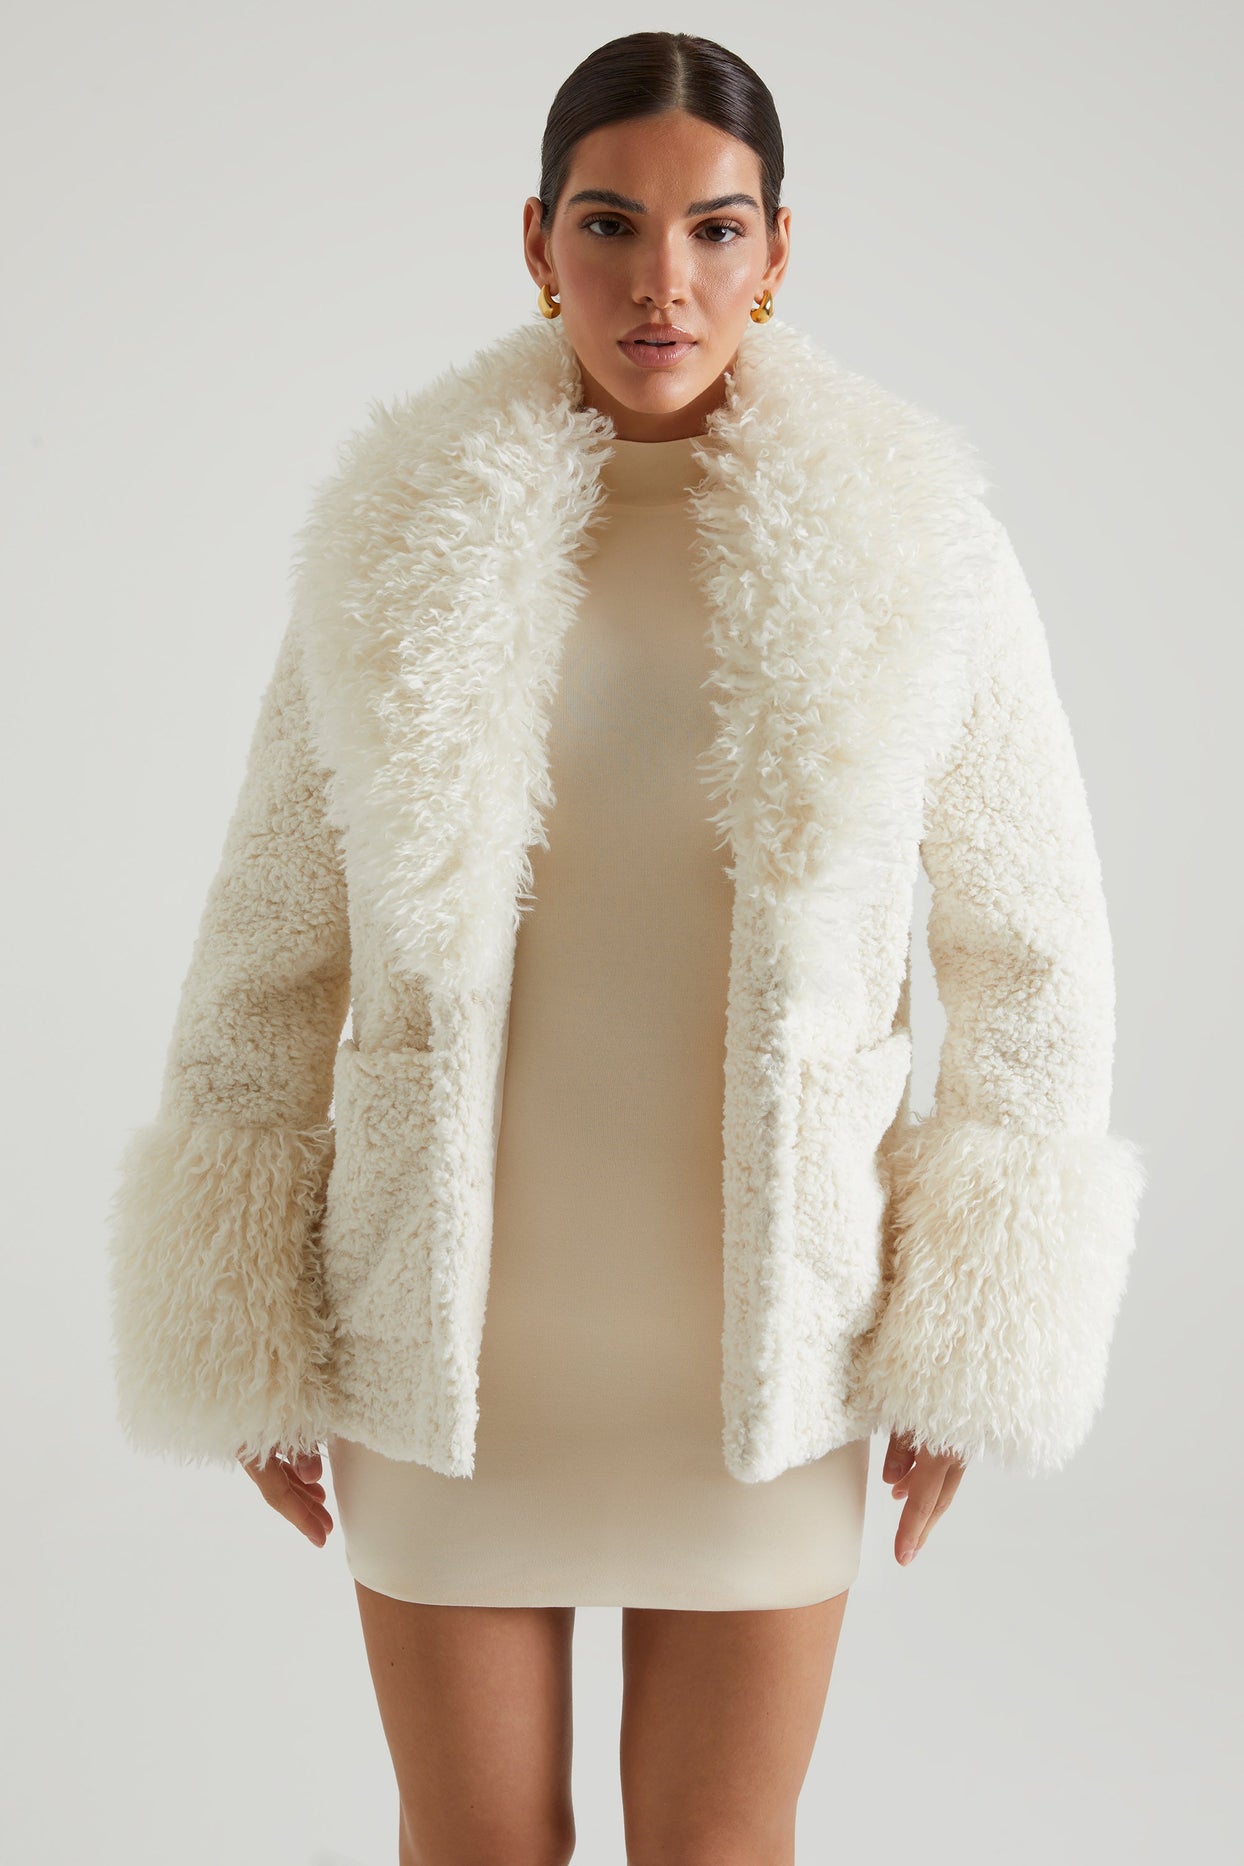 The Shearling Teddy Coat (At Every Price Point!) - The Charming